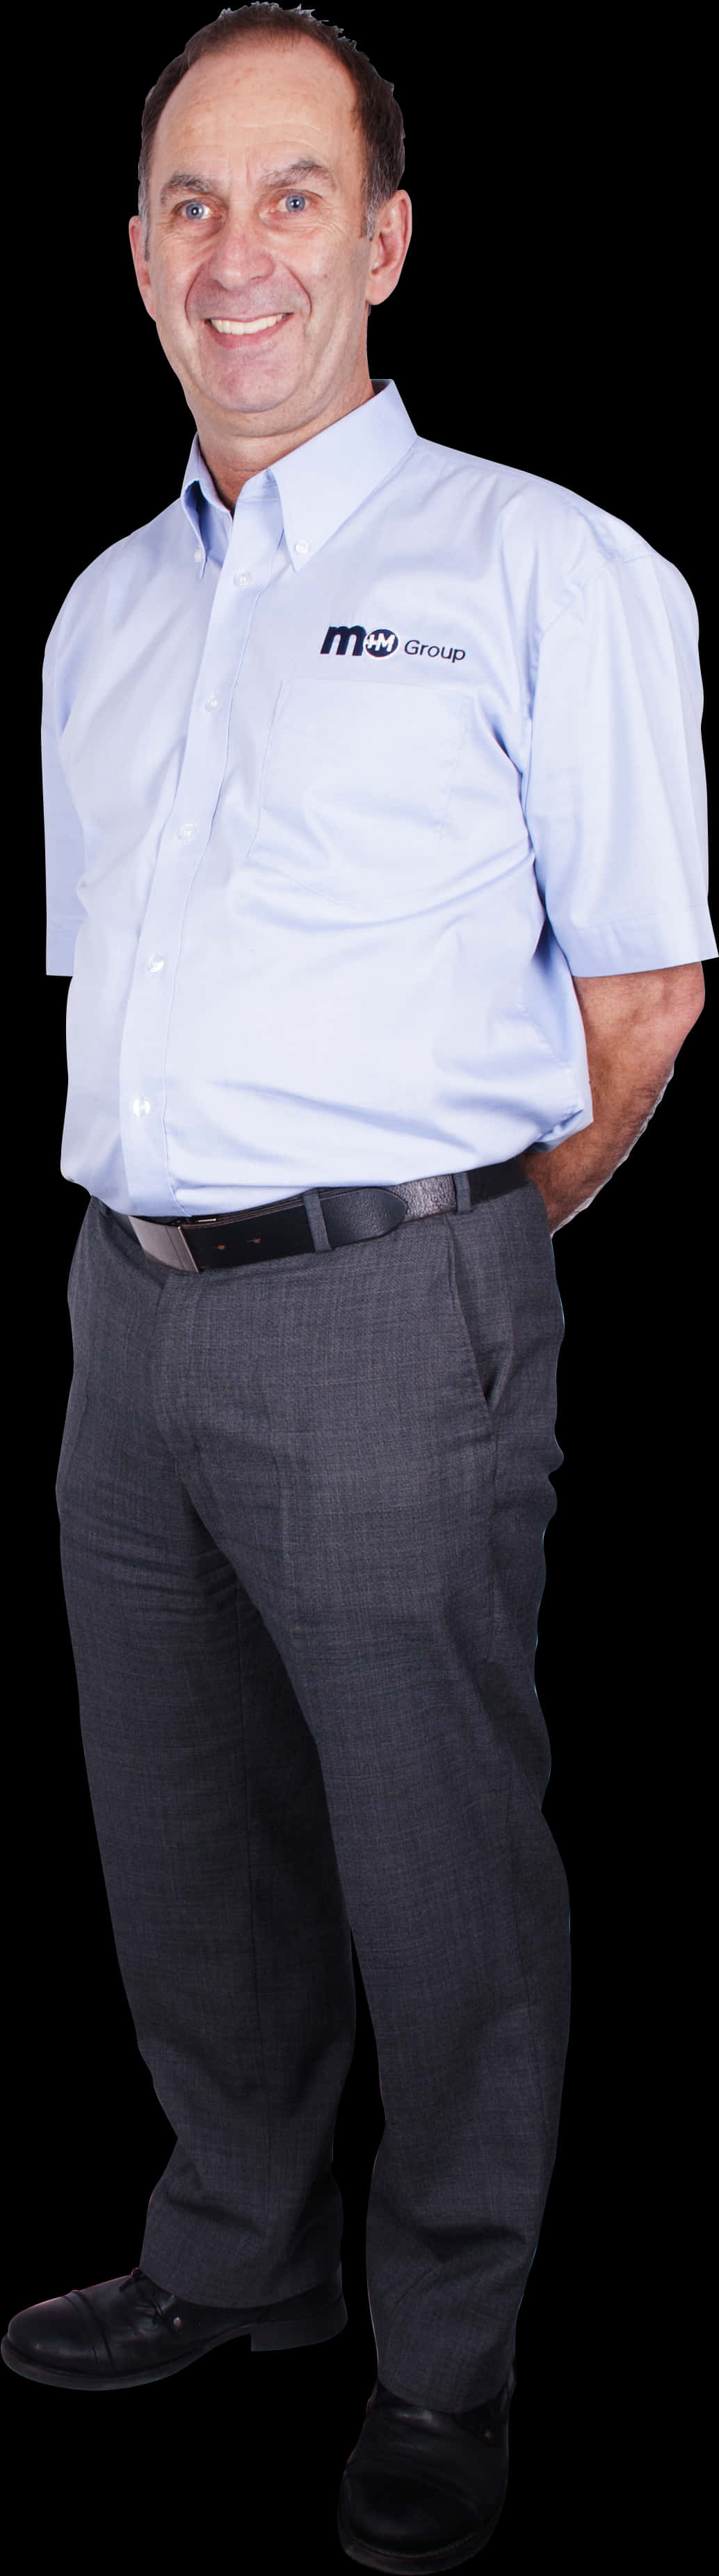 A Man In A Blue Shirt And Grey Pants